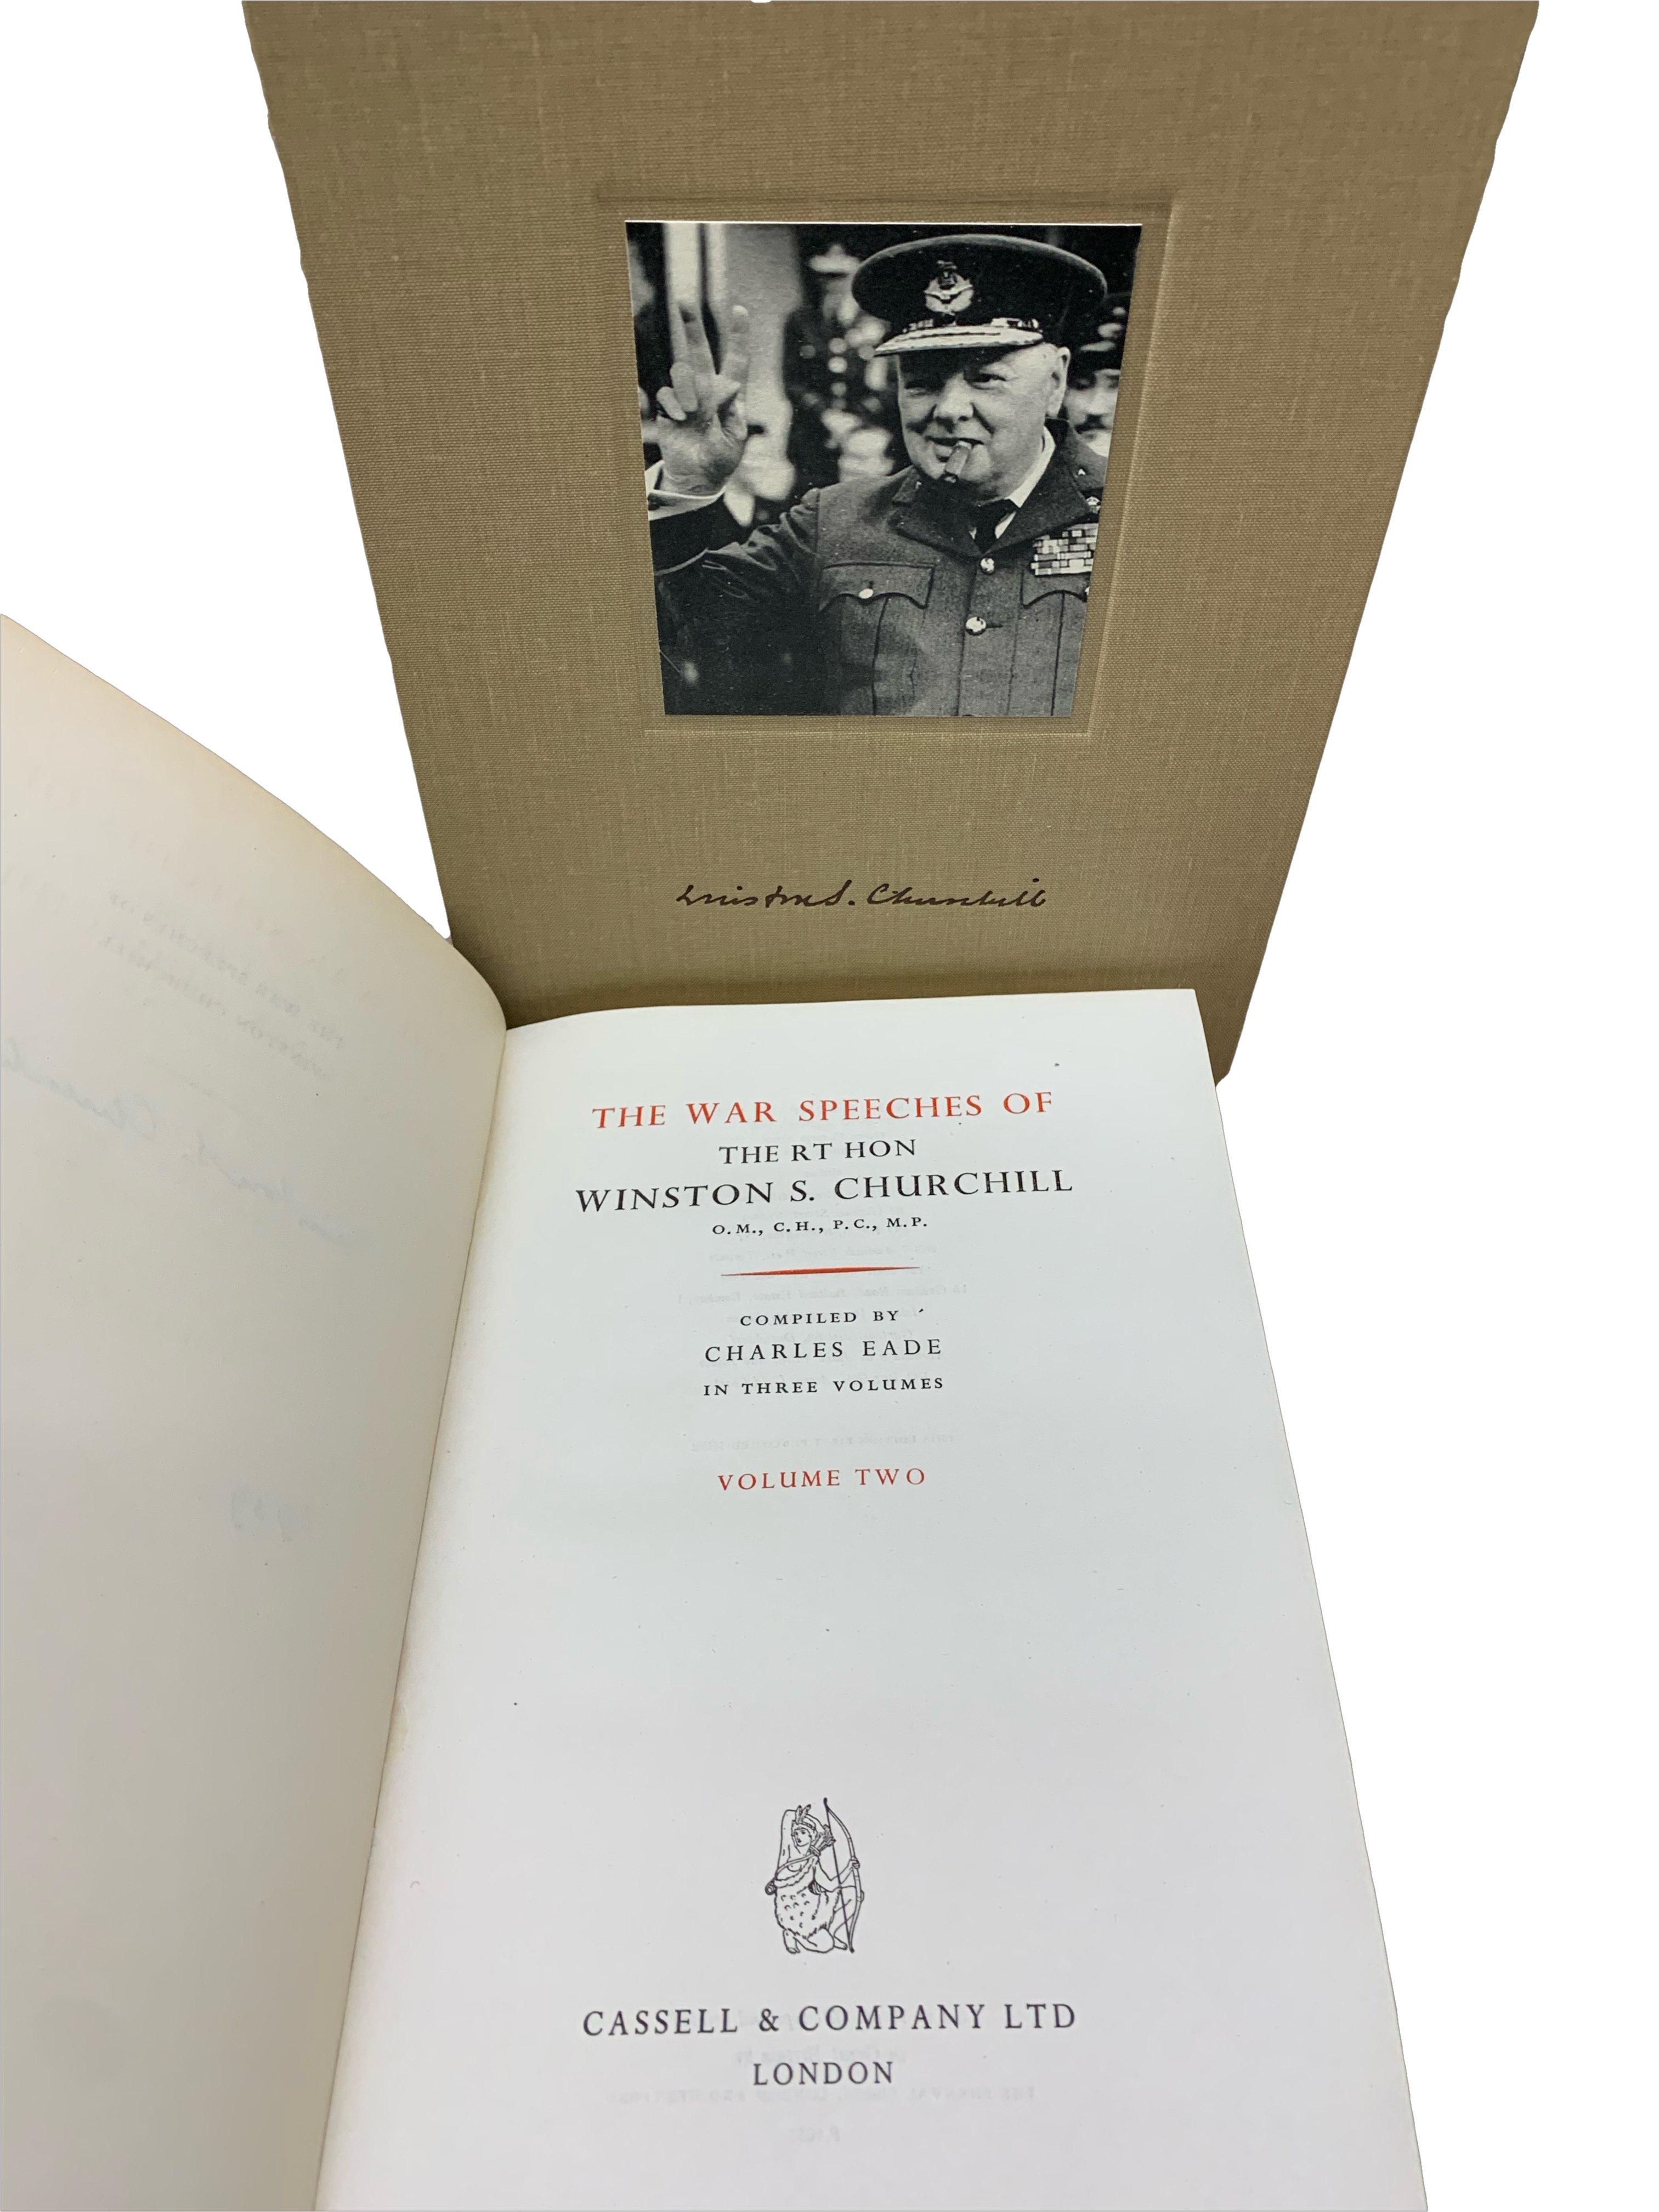 Mid-20th Century The War Speeches of the Rt. Hon. Winston S. Churchill, Signed by Churchill